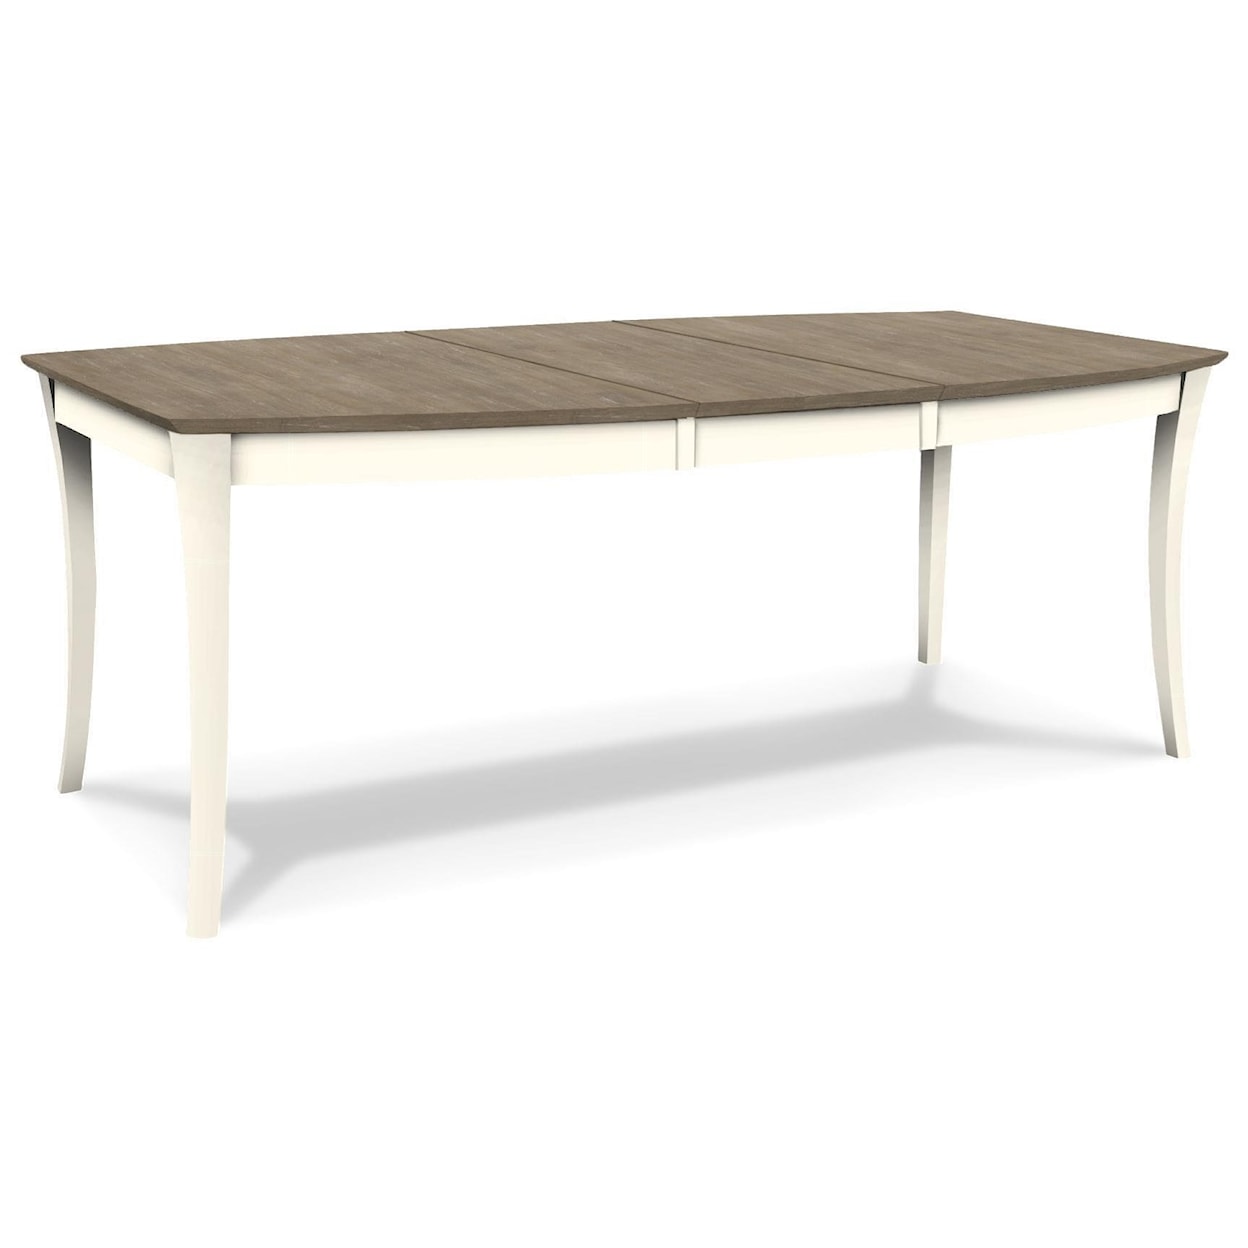 John Thomas SELECT Dining Room White and Grey Dining Table